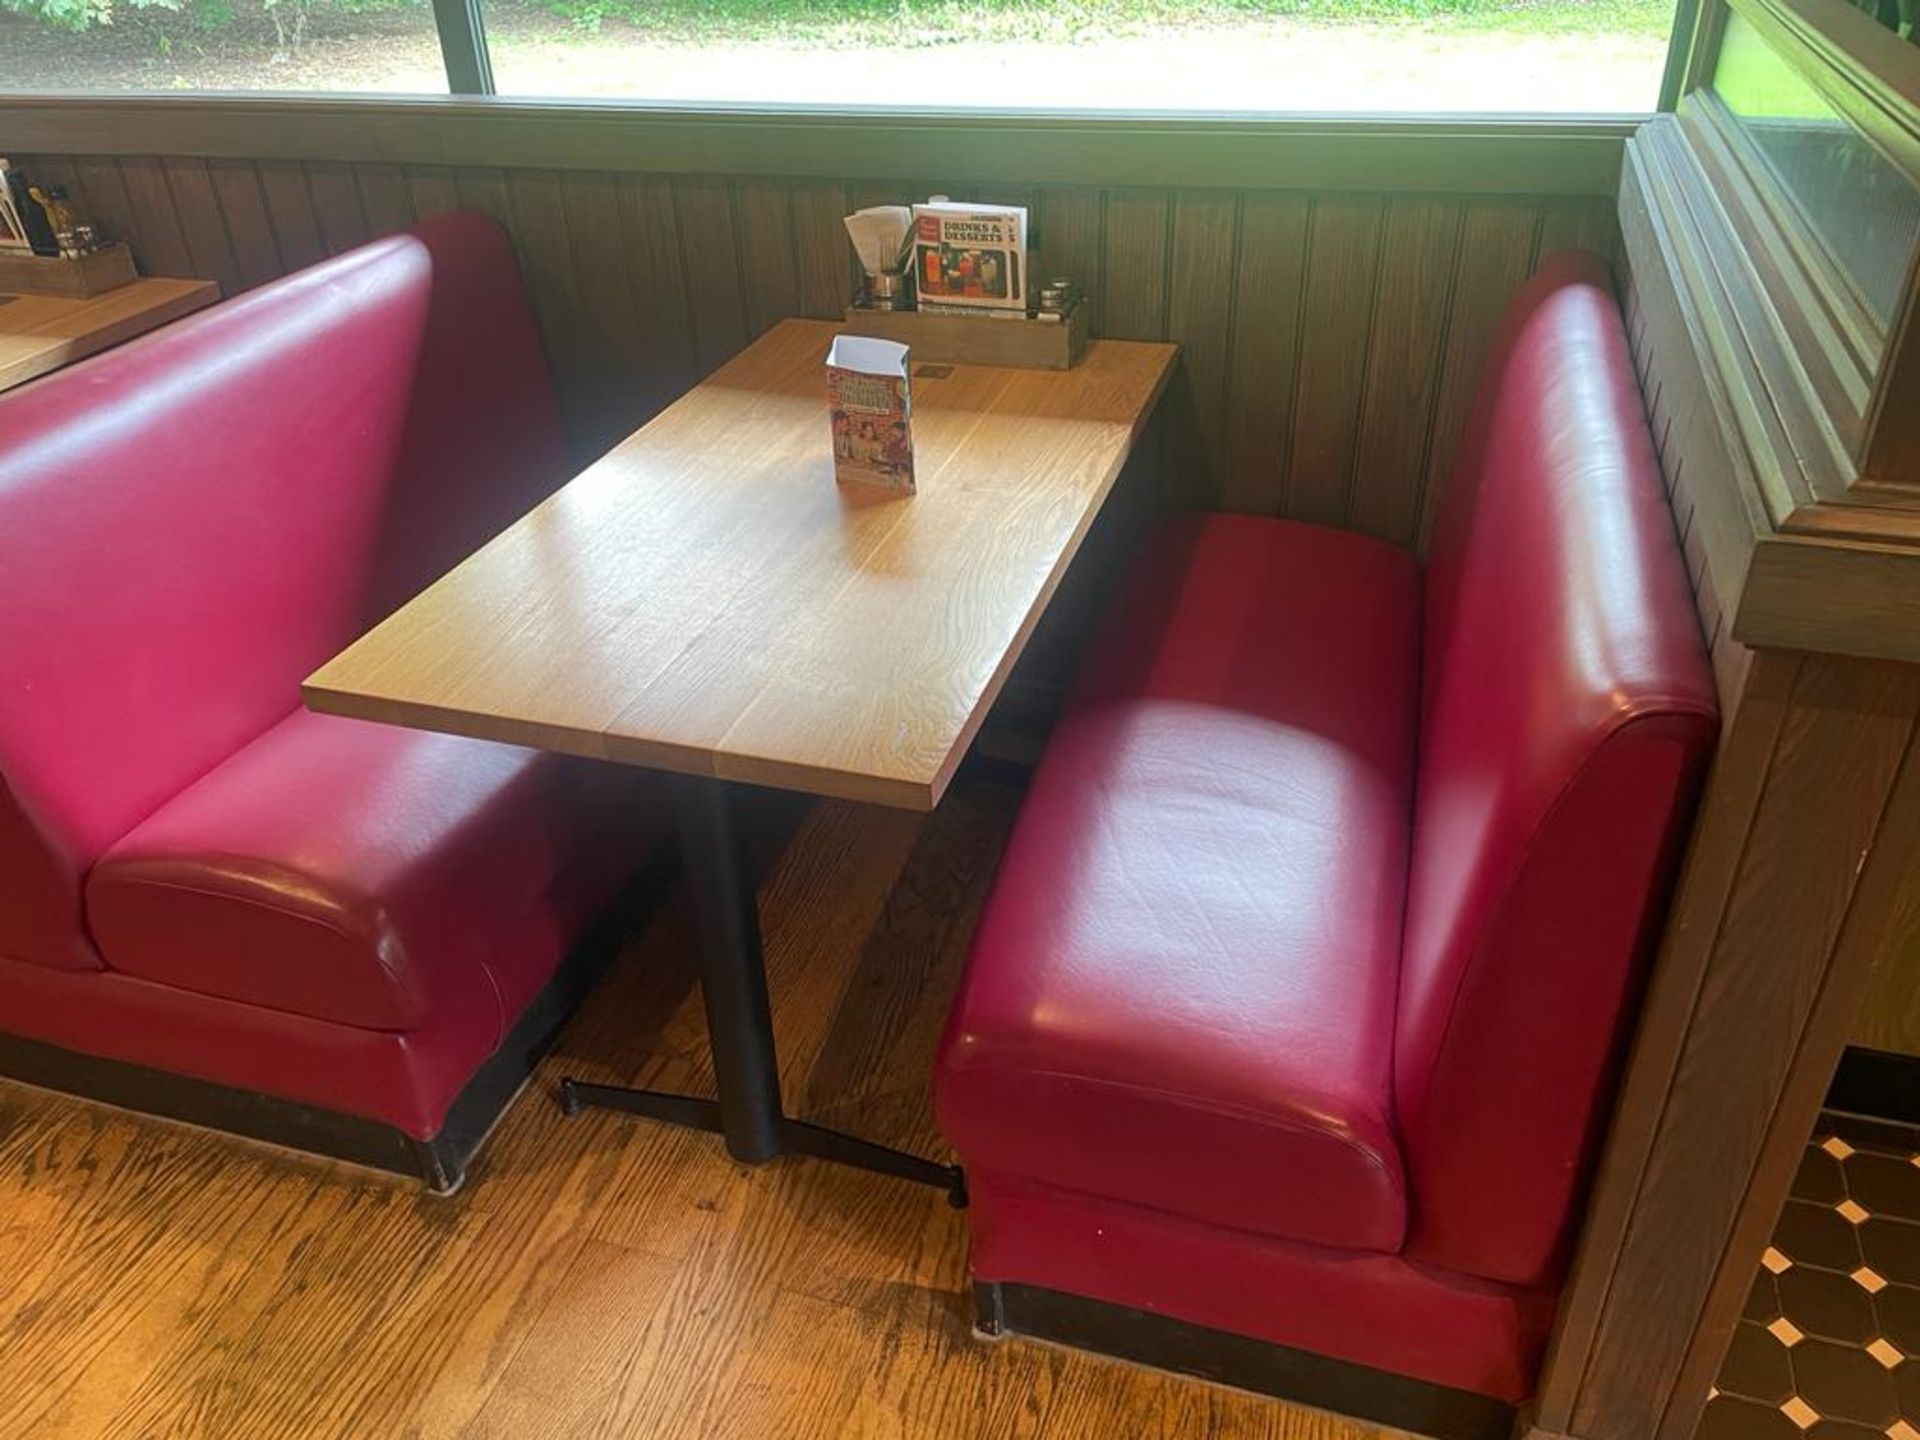 1 x Collection of Restaurant Booth Seating in a Red Faux Leather Upholstery - Image 3 of 8